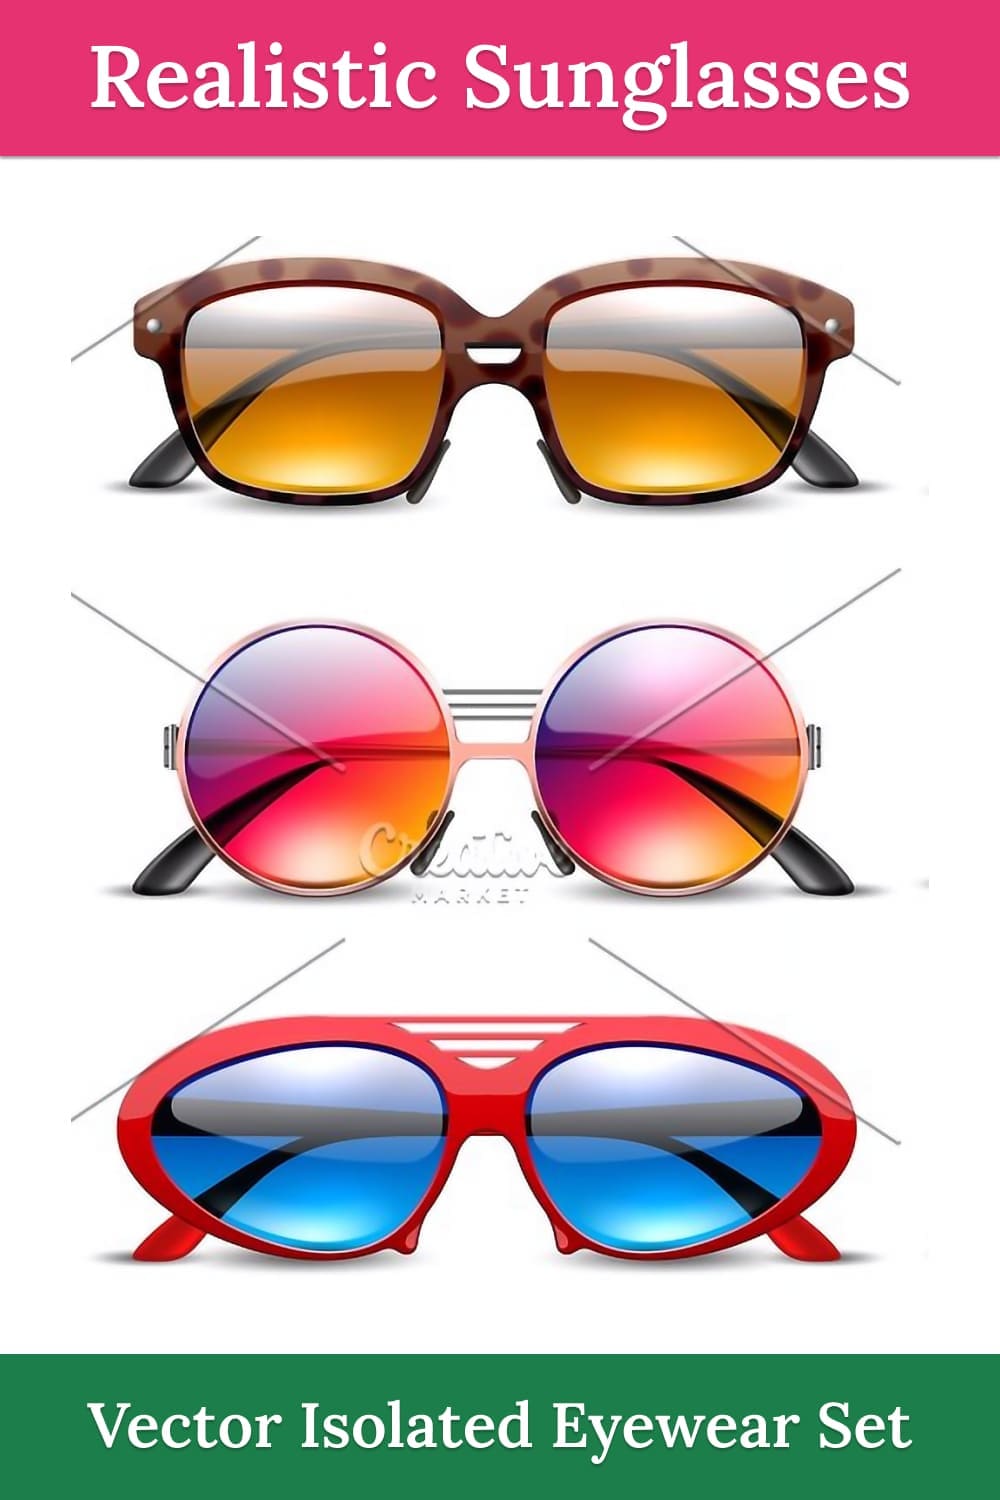 Realistic sunglasses. tinted eyewear, picture for pinterest.